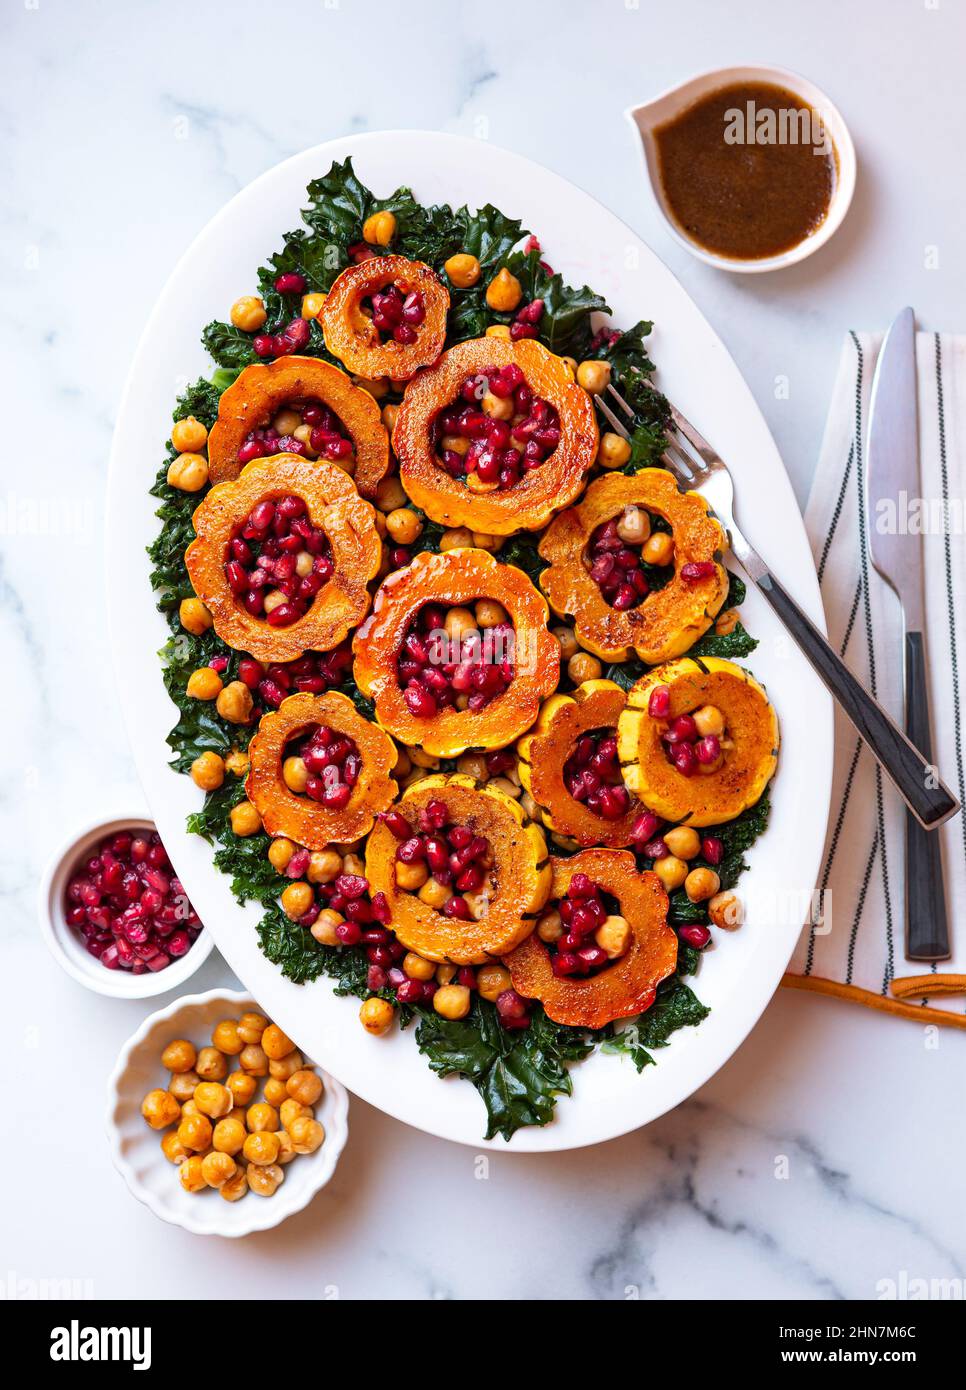 Overhead view of a plant-based salad made from delicata squash, wilted kale, chickpeas and pomegrante seed Stock Photo